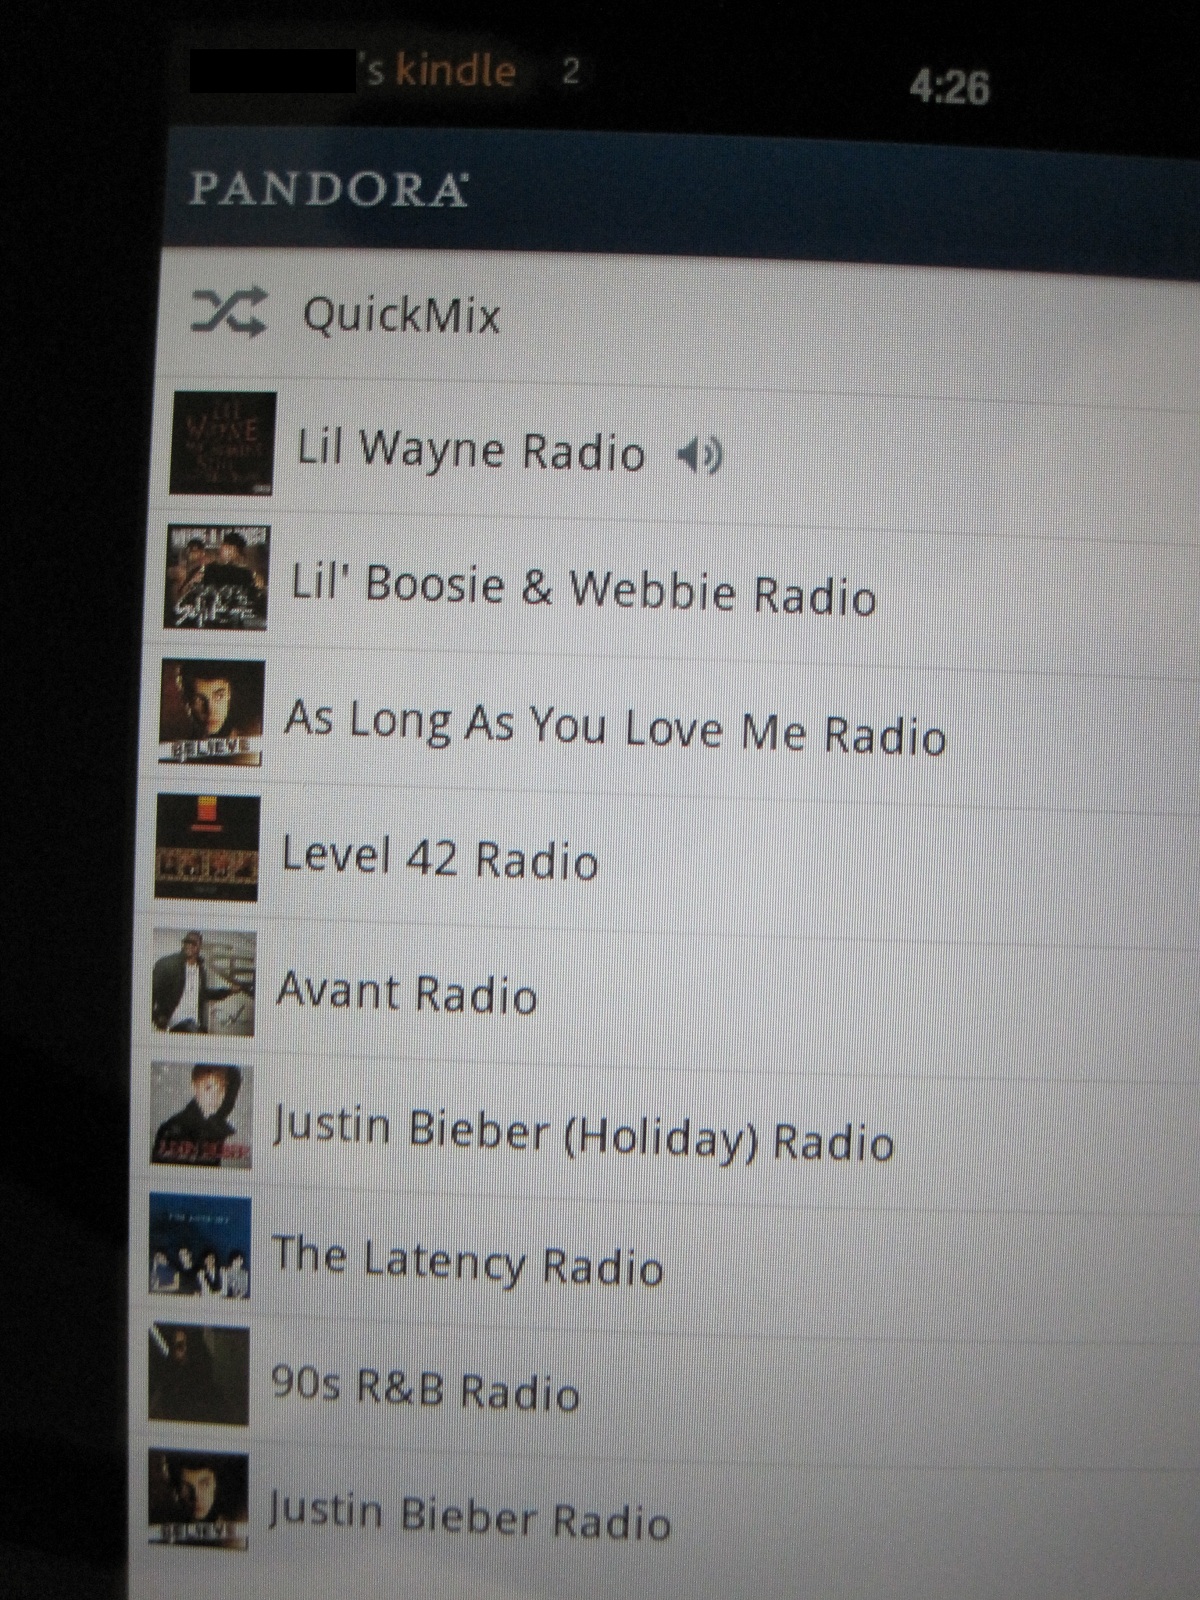 The previous owner's Pandora radio stations.